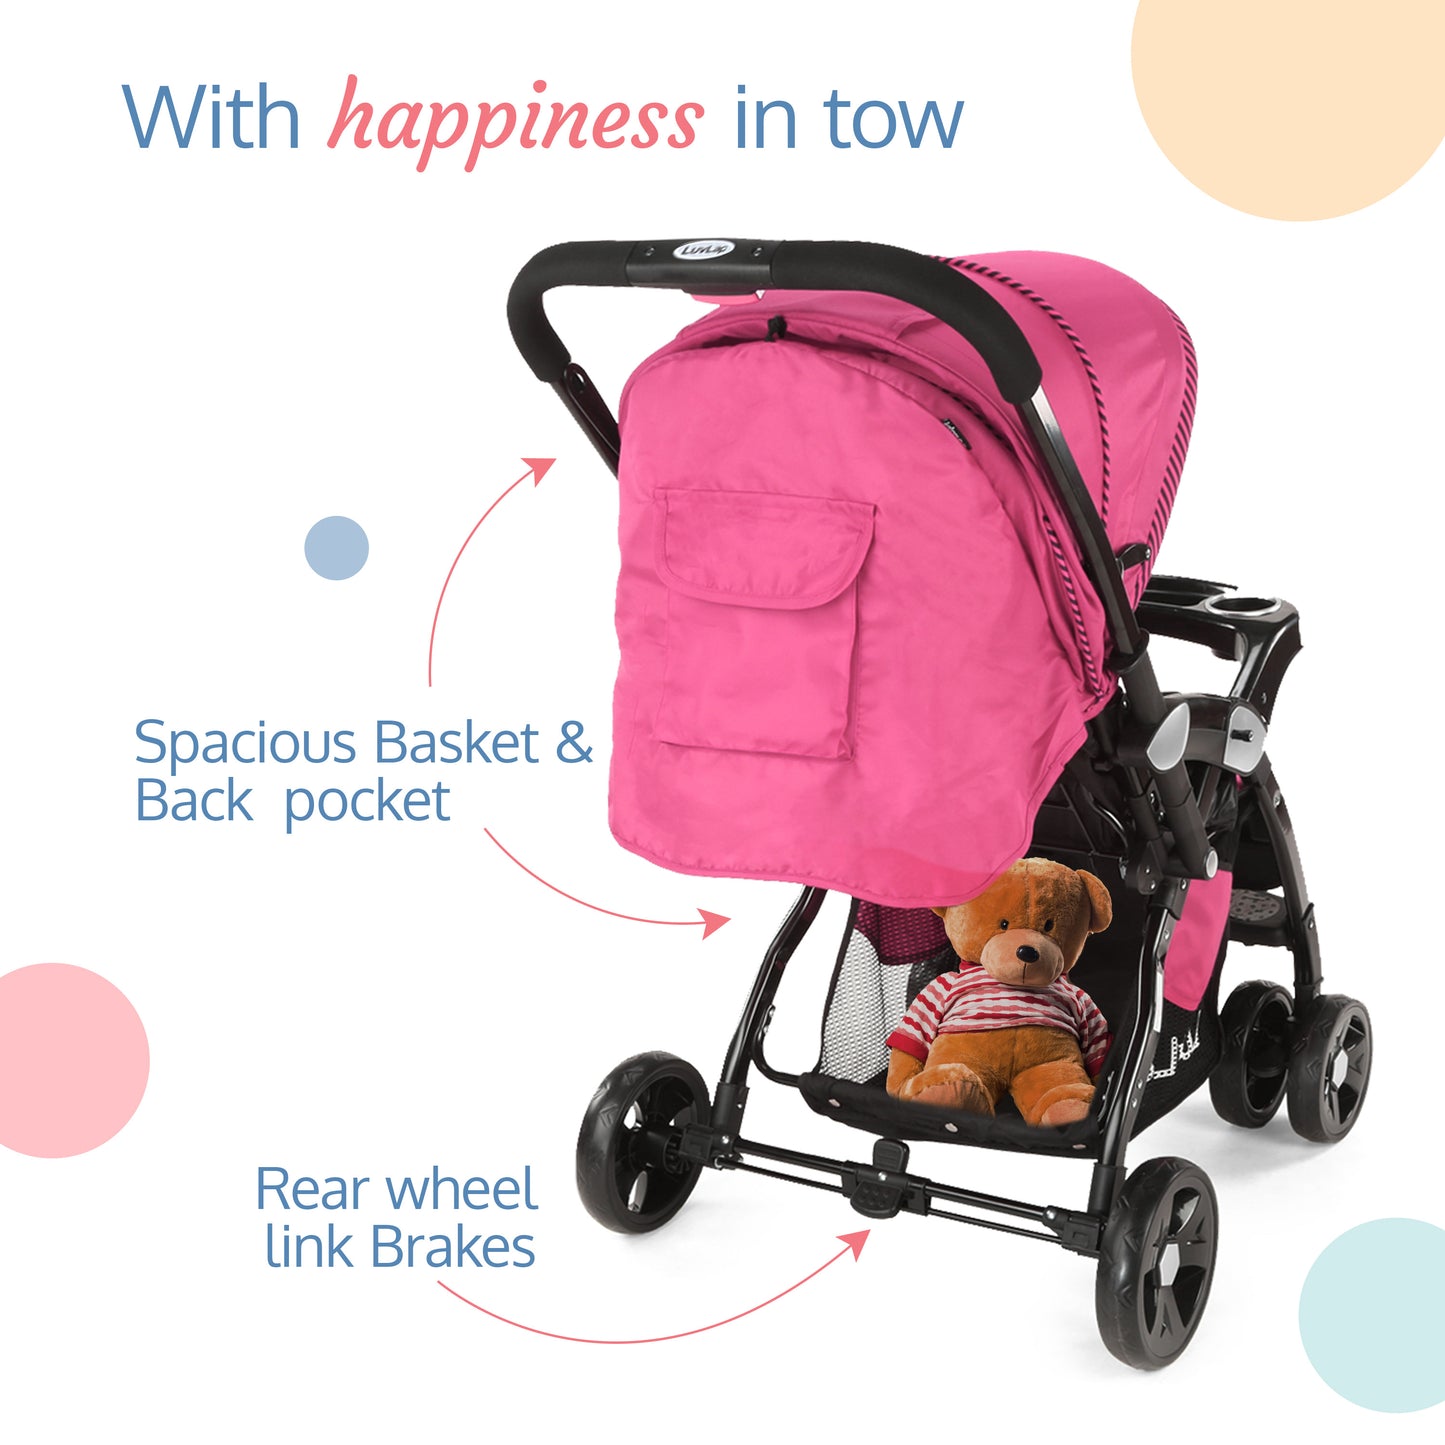 Galaxy baby stroller, Pram for baby with 5 point safety harness, Spacious Cushioned seat with Multi level seat recline, Easy Fold, Lightweight baby stroller for 0 to 3 years (Pink & Black)